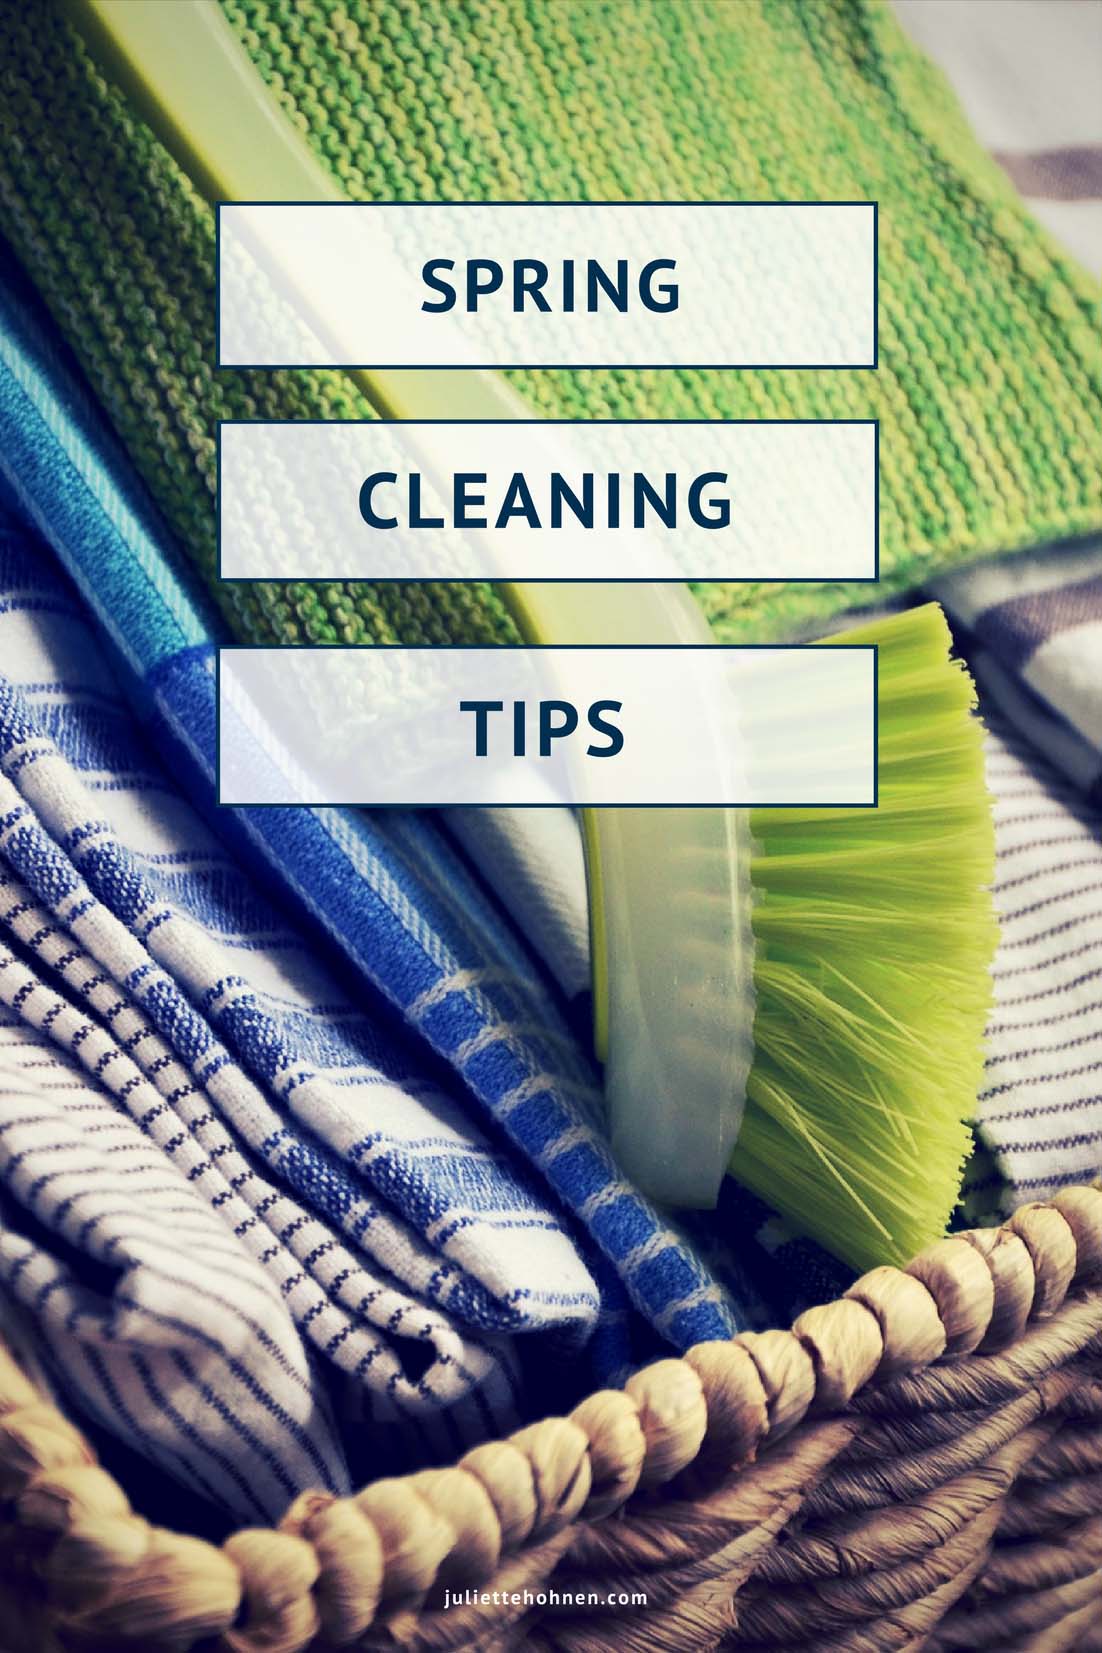 Spring Cleaning Tips – 10 Things to Tackle This Year